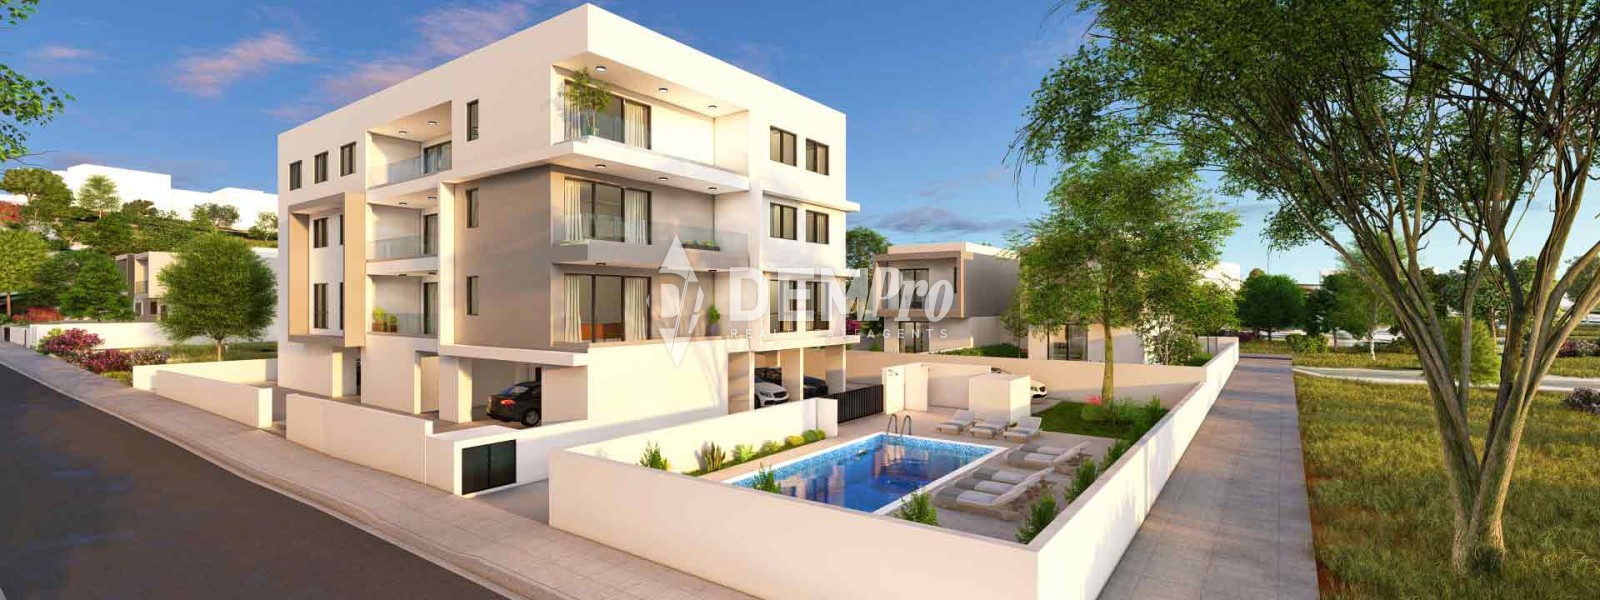 3 Bedroom Apartment for Sale in Paphos – City Center